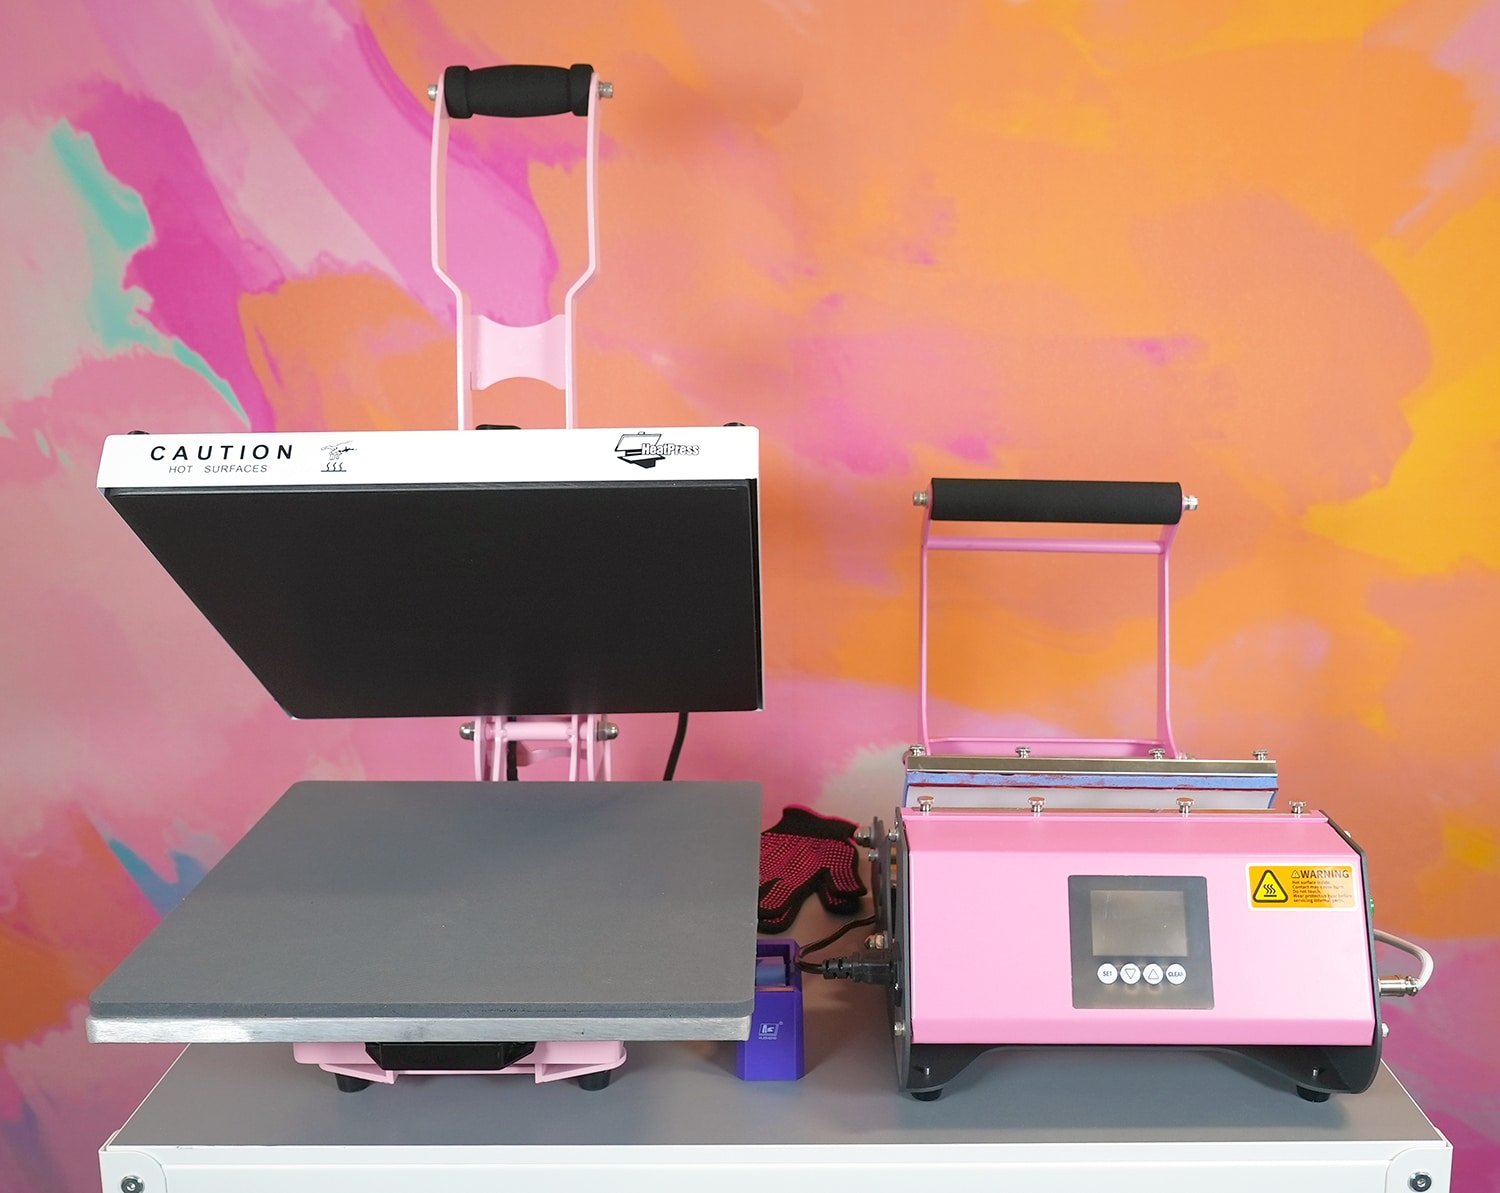 Pink heat press and pink tumbler heat press sitting on a white cart in front of a colorful wall